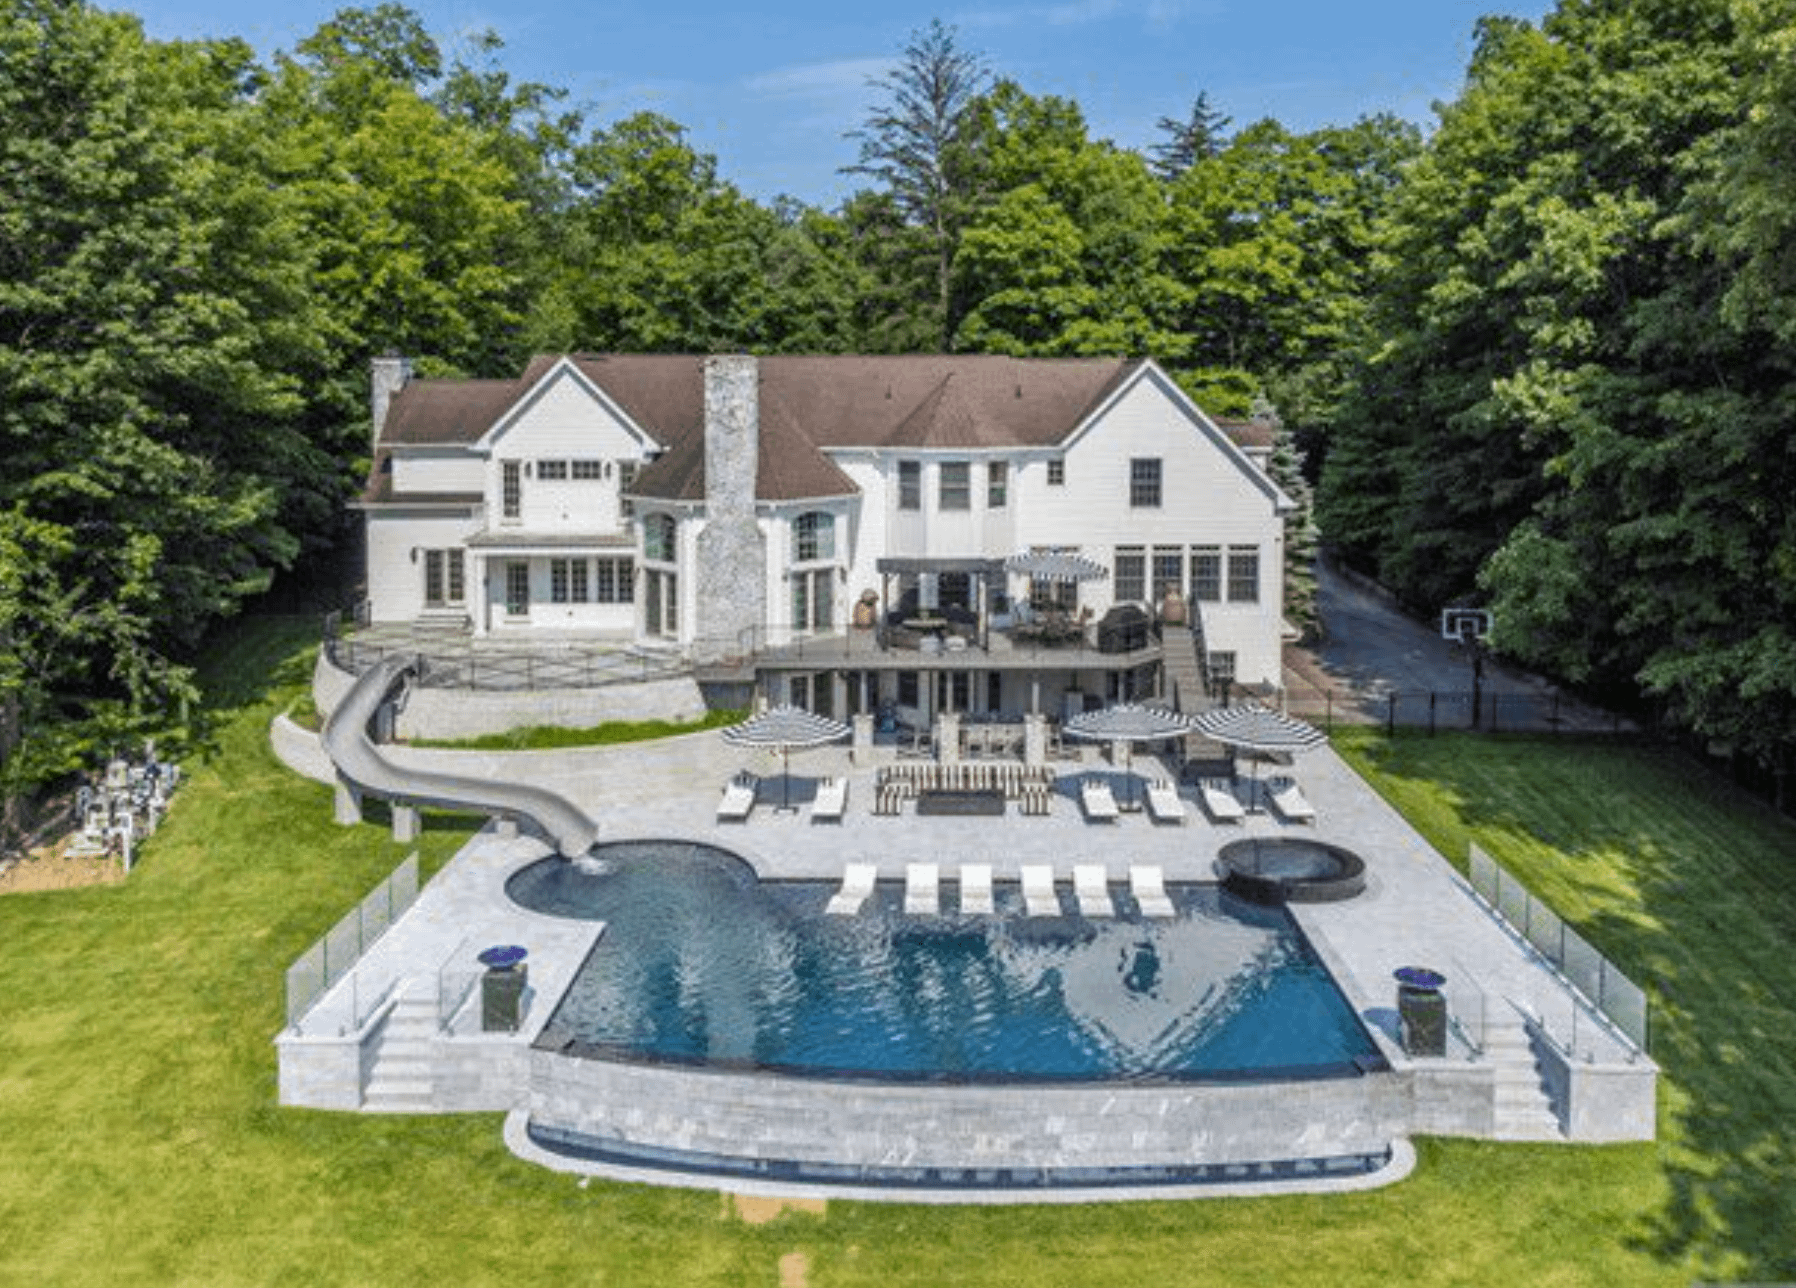 New Jersey Home With Huge Infinity Pool (PHOTOS)